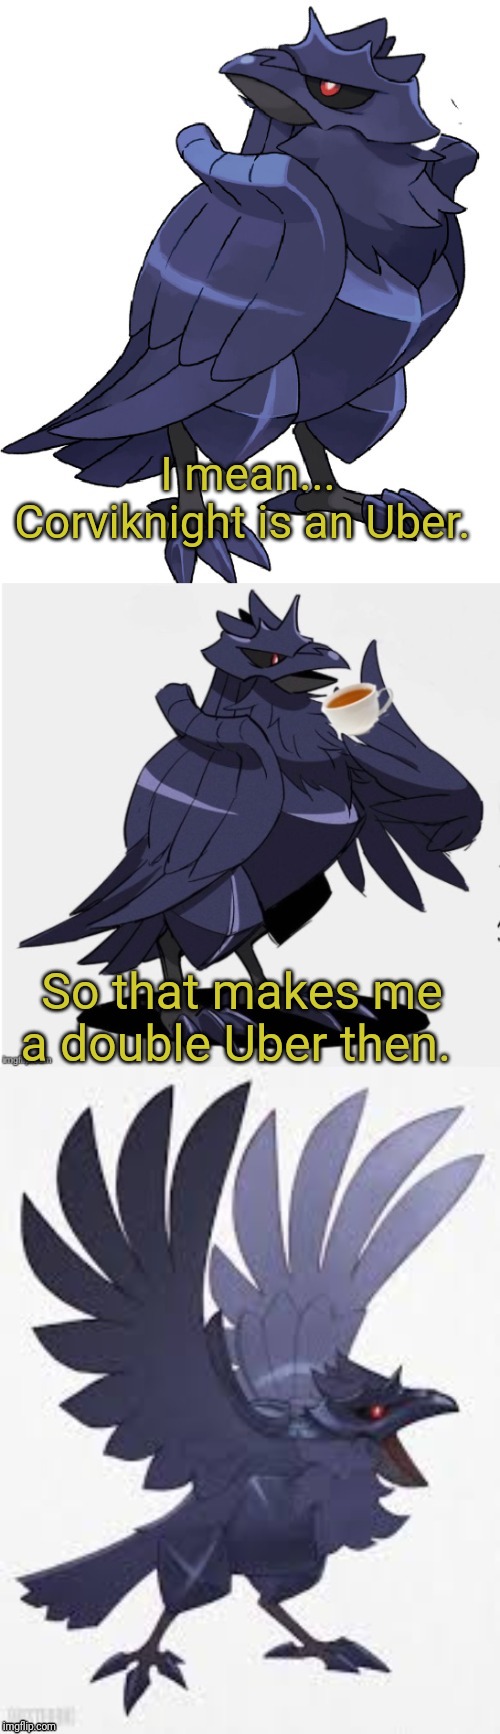 Bad Pun TTDC | I mean... Corviknight is an Uber. So that makes me a double Uber then. | image tagged in bad pun ttdc | made w/ Imgflip meme maker